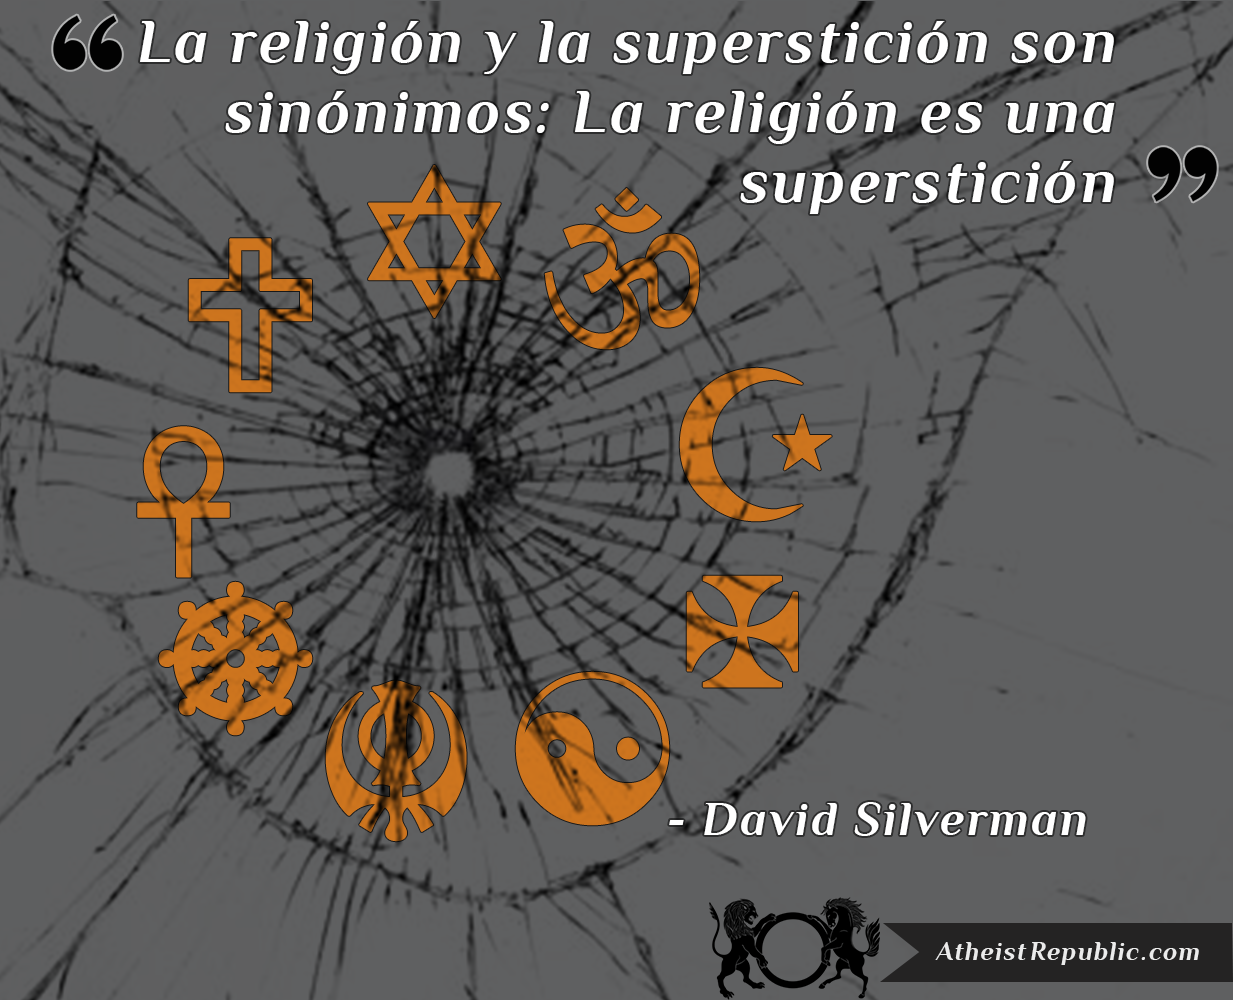 Religion and Superstition